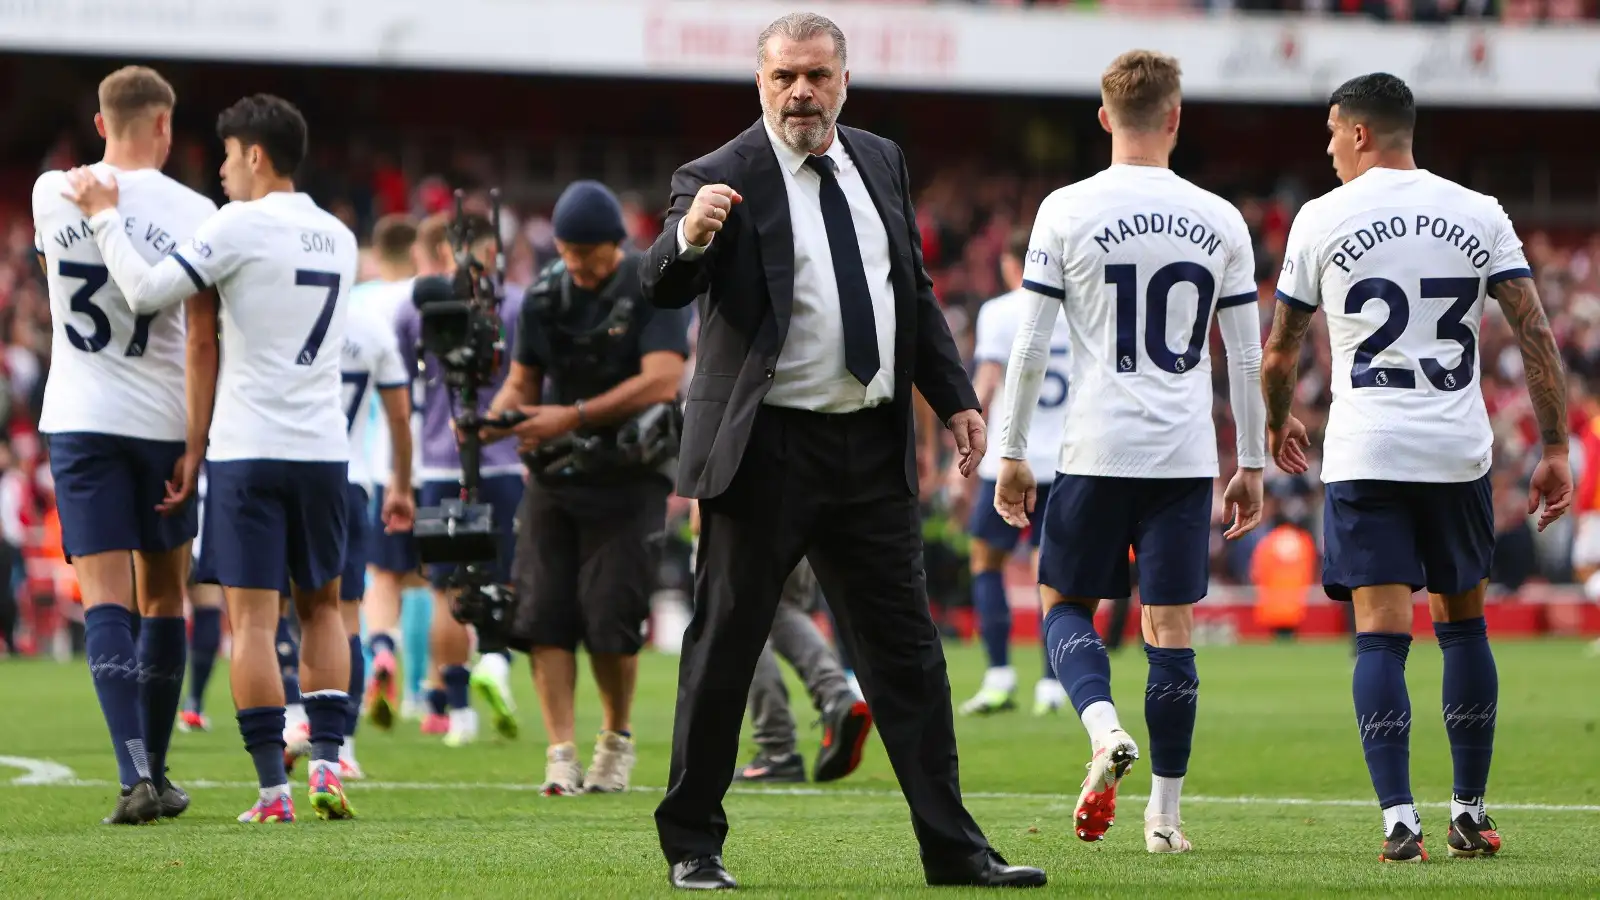 Tottenham Premier League finishes all-time: Why Spurs are